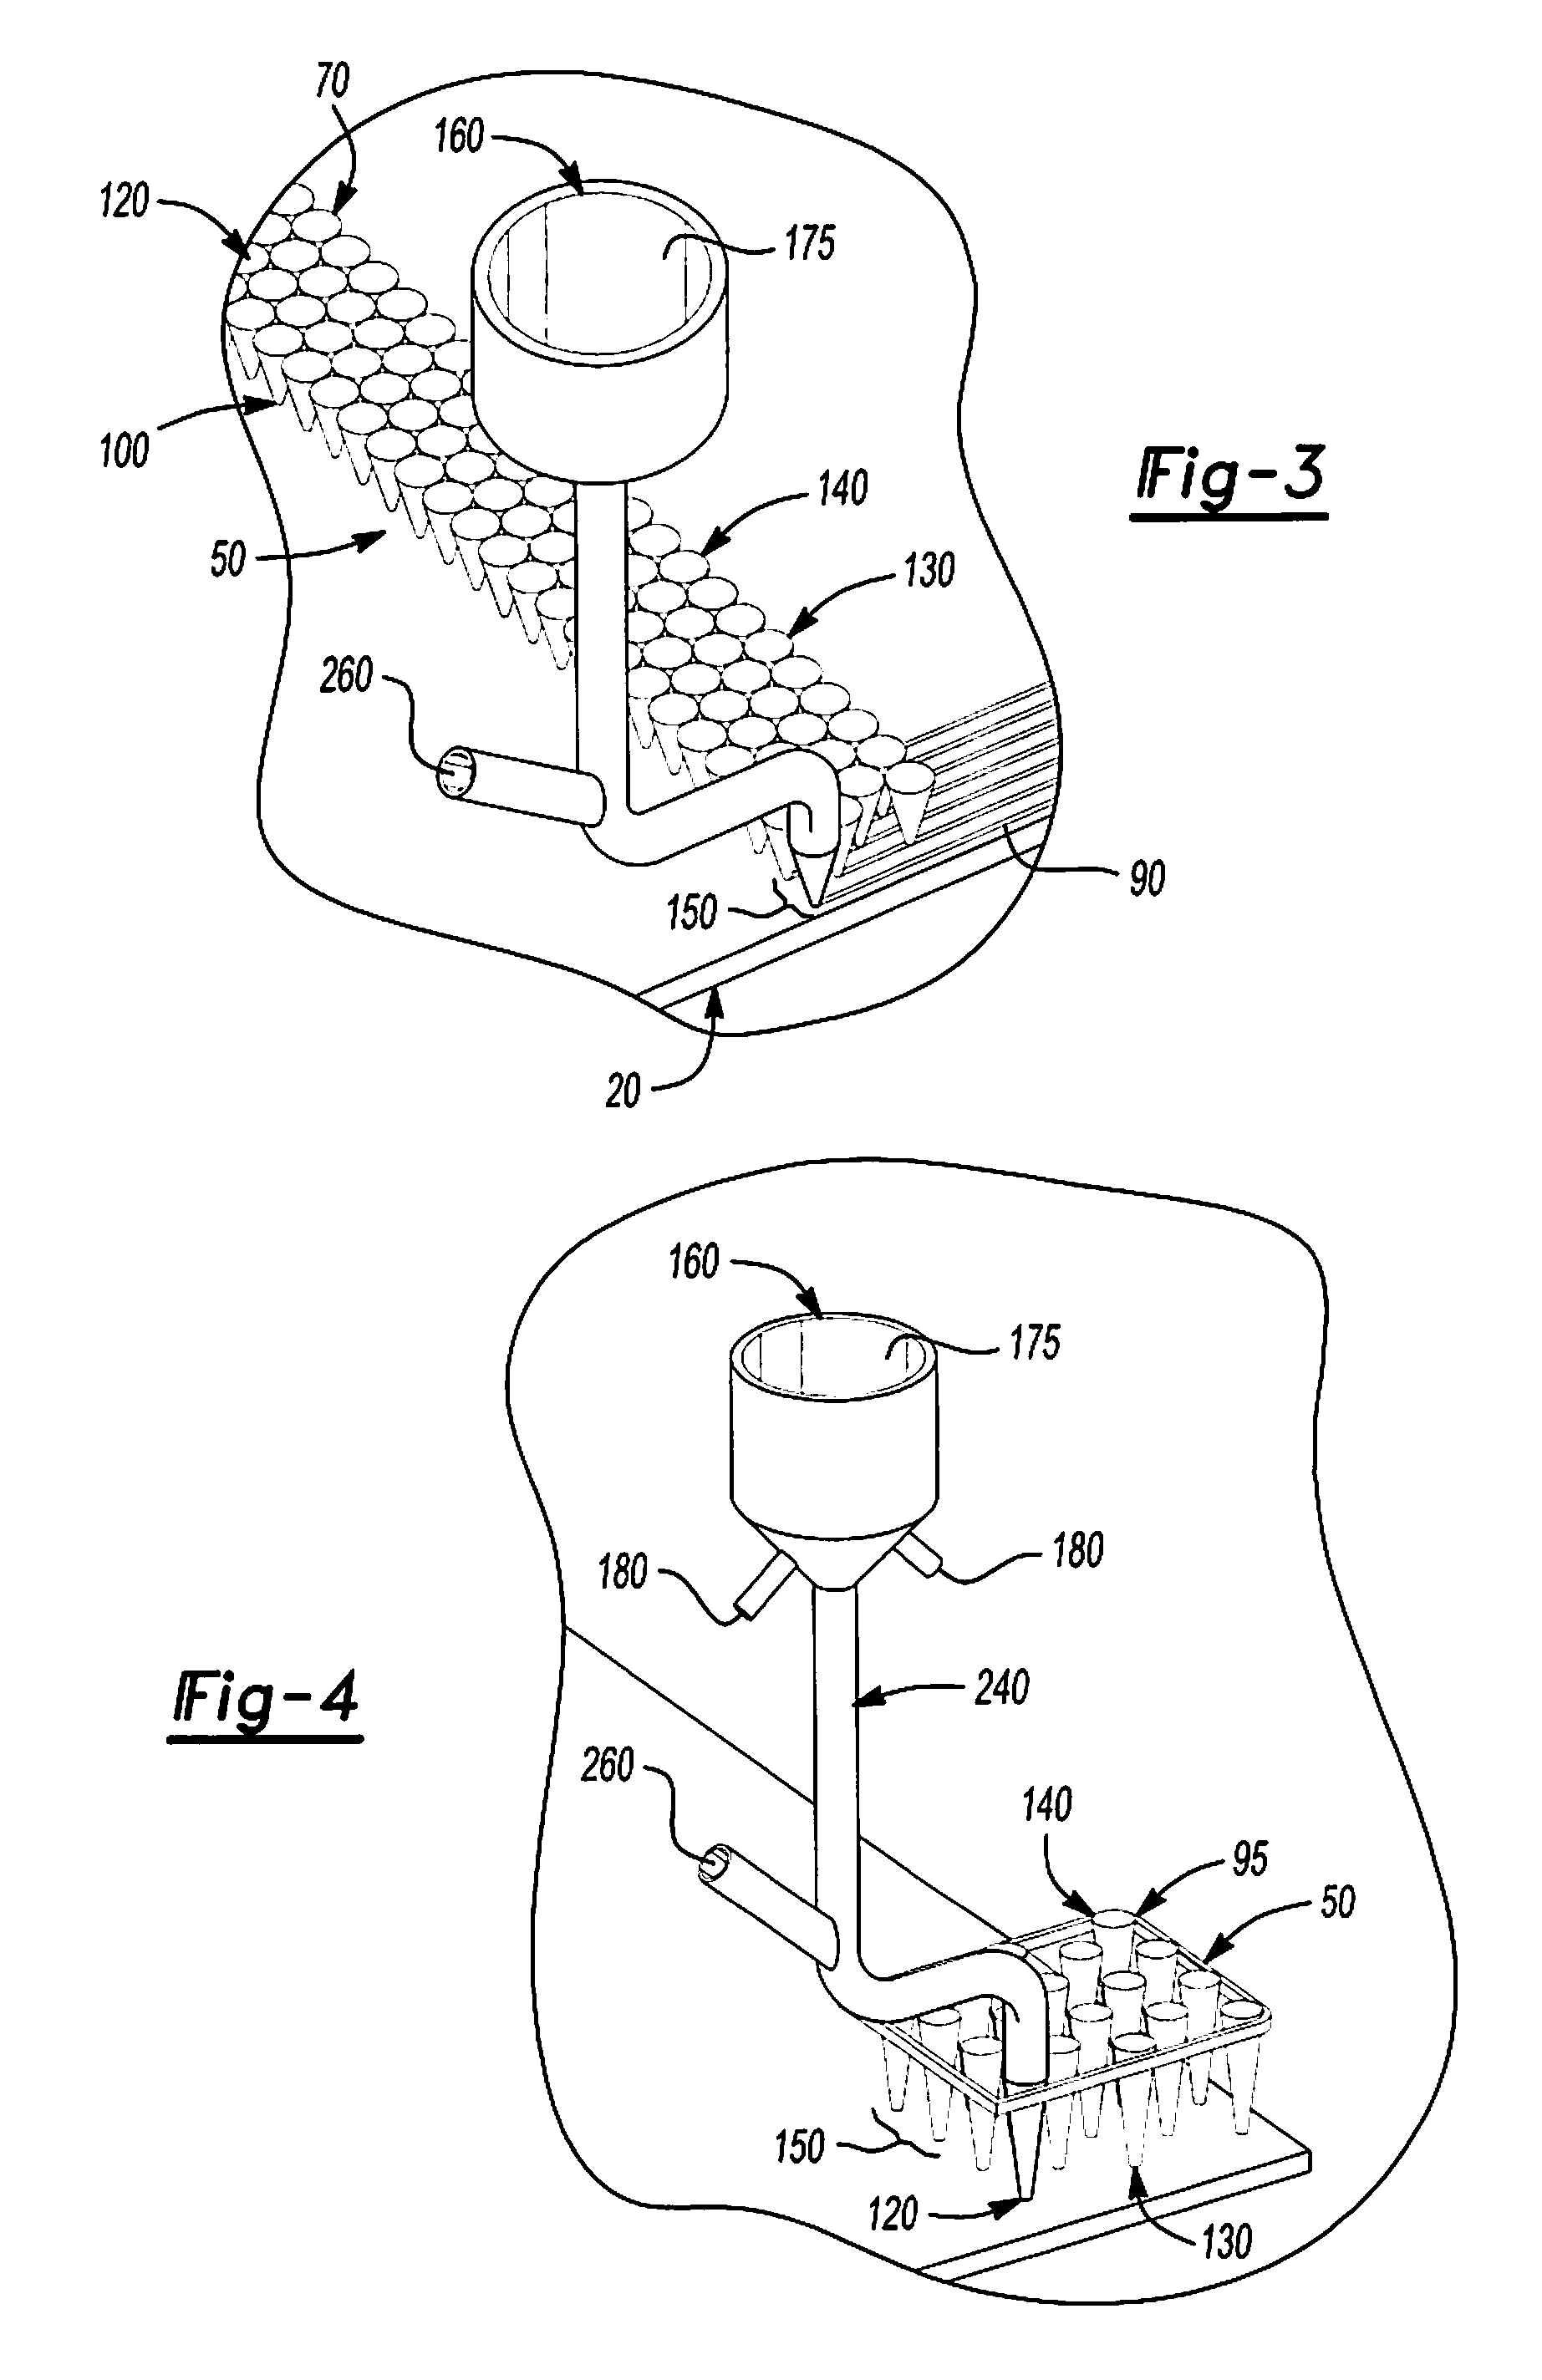 Solid freeform fabrication of structurally engineered multifunctional devices